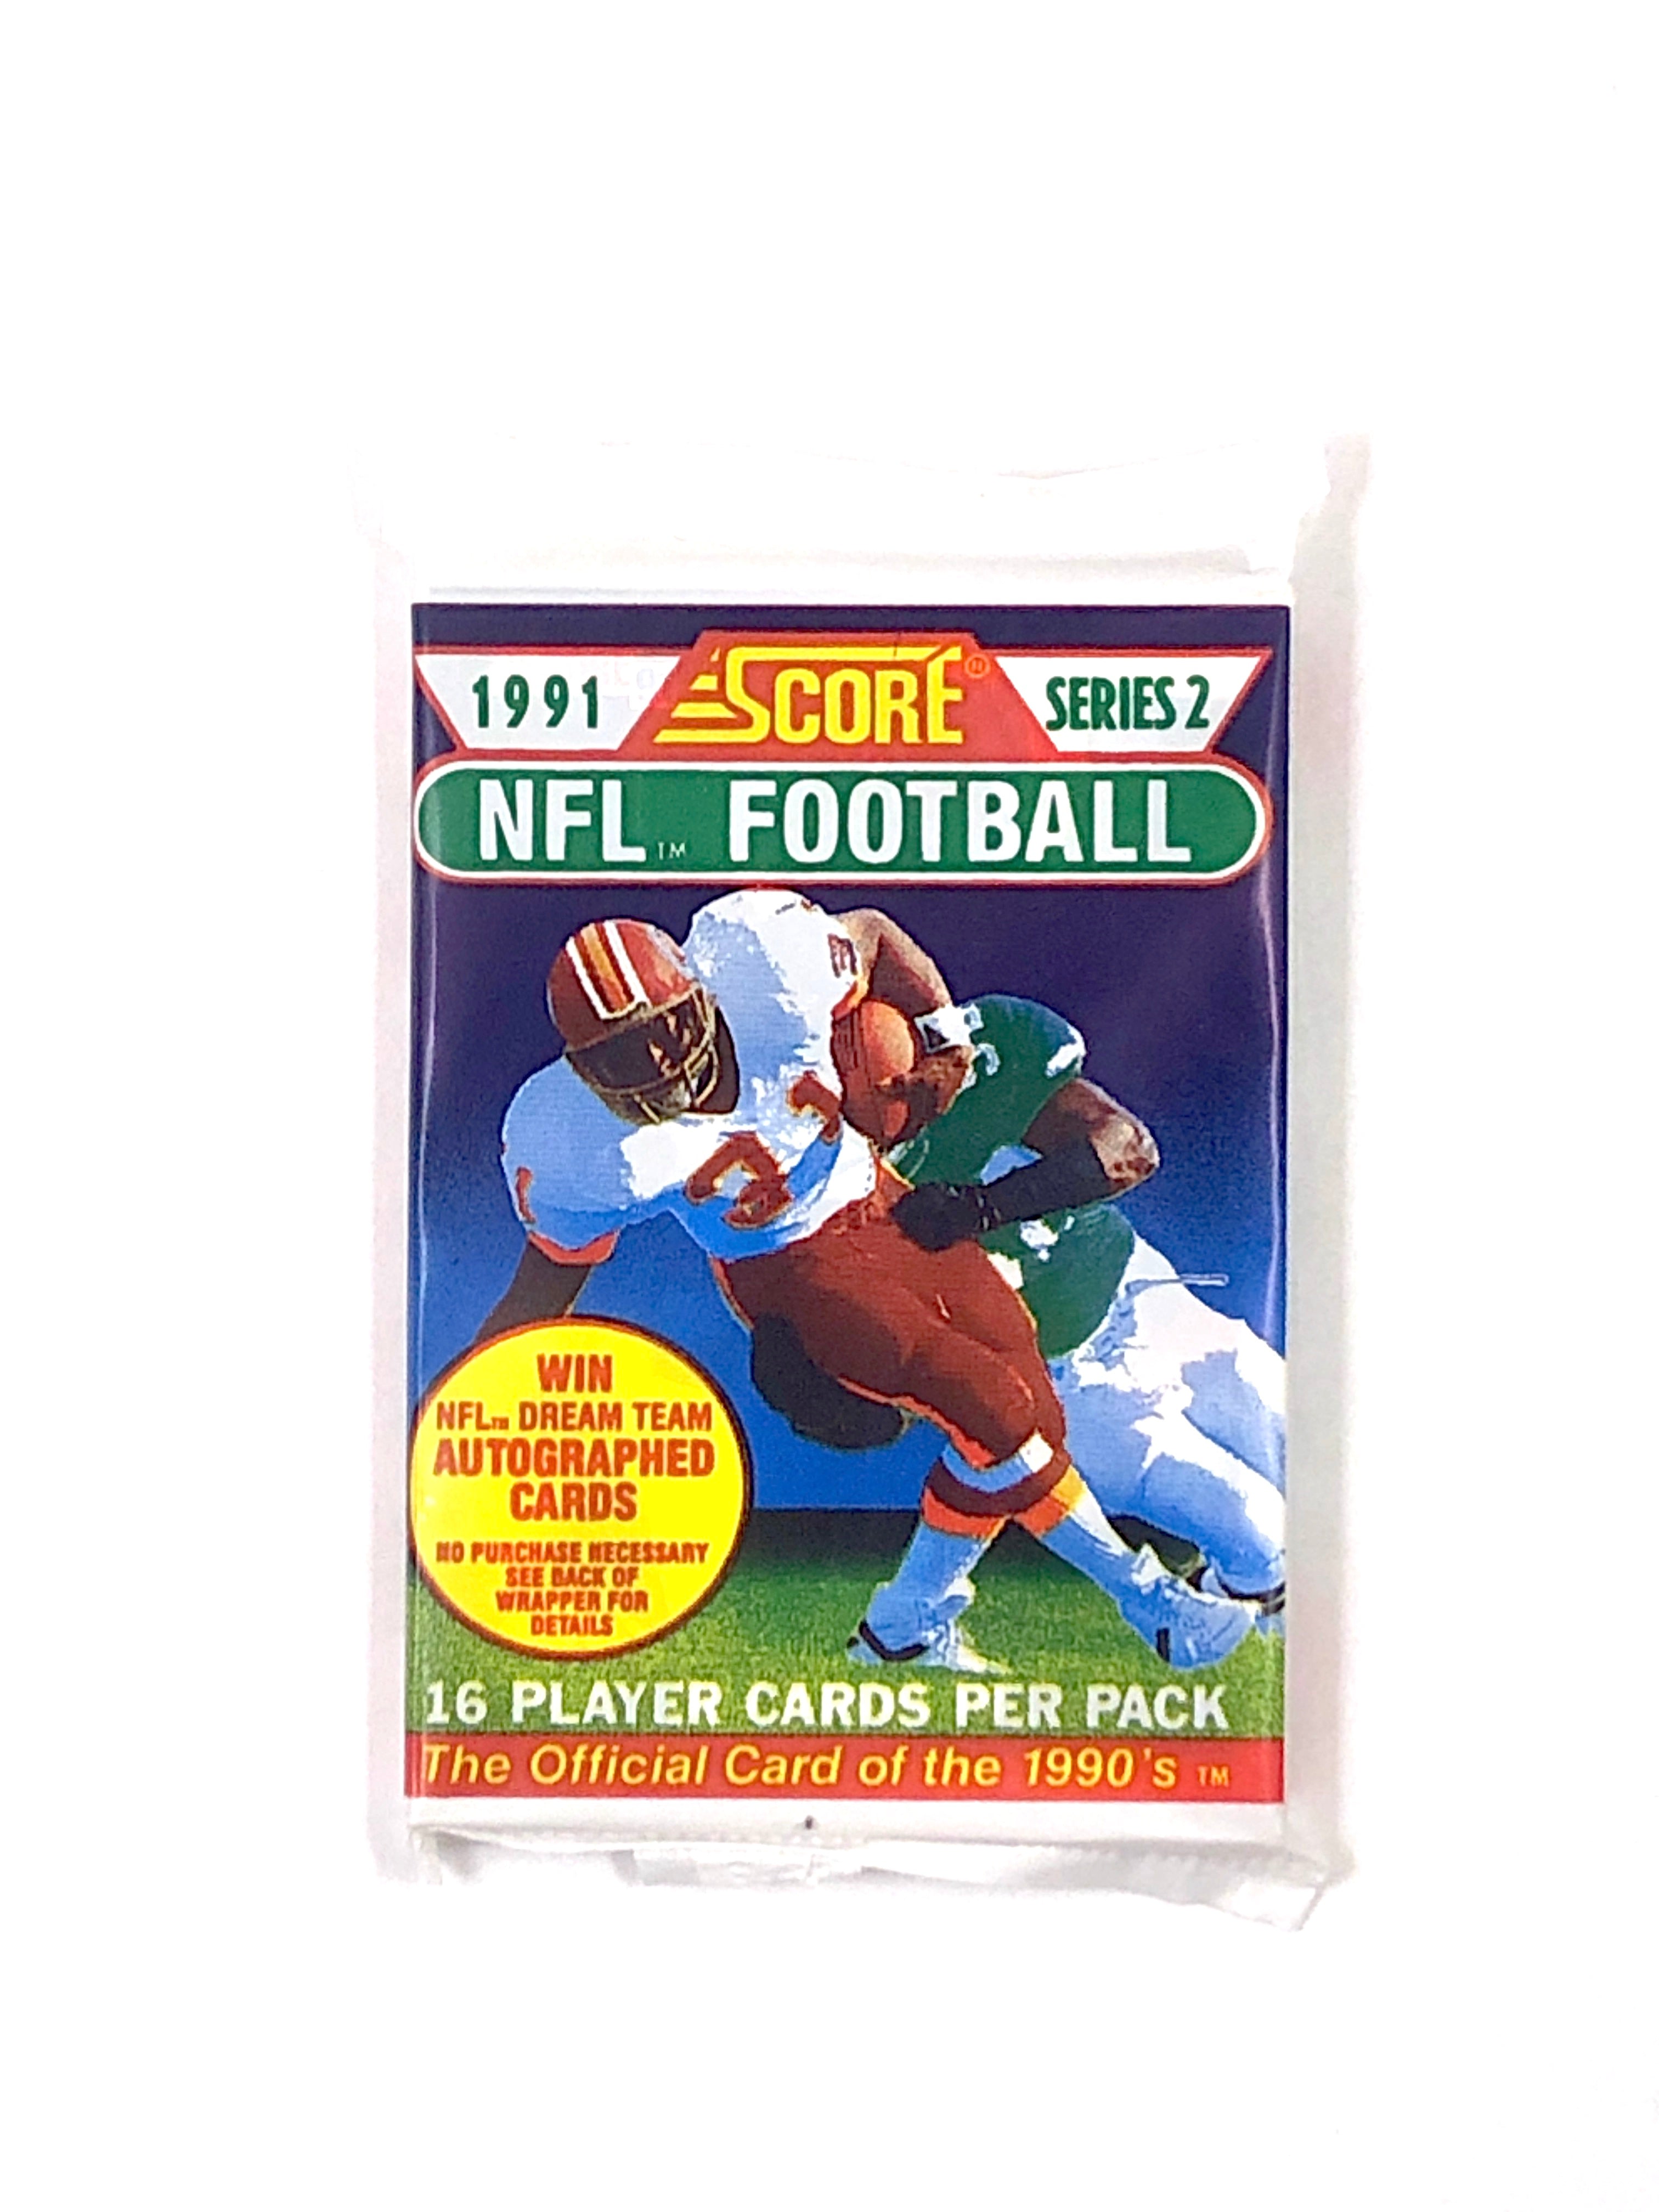 1991 Score NFL Football Series 2 - Sports Cards Norge